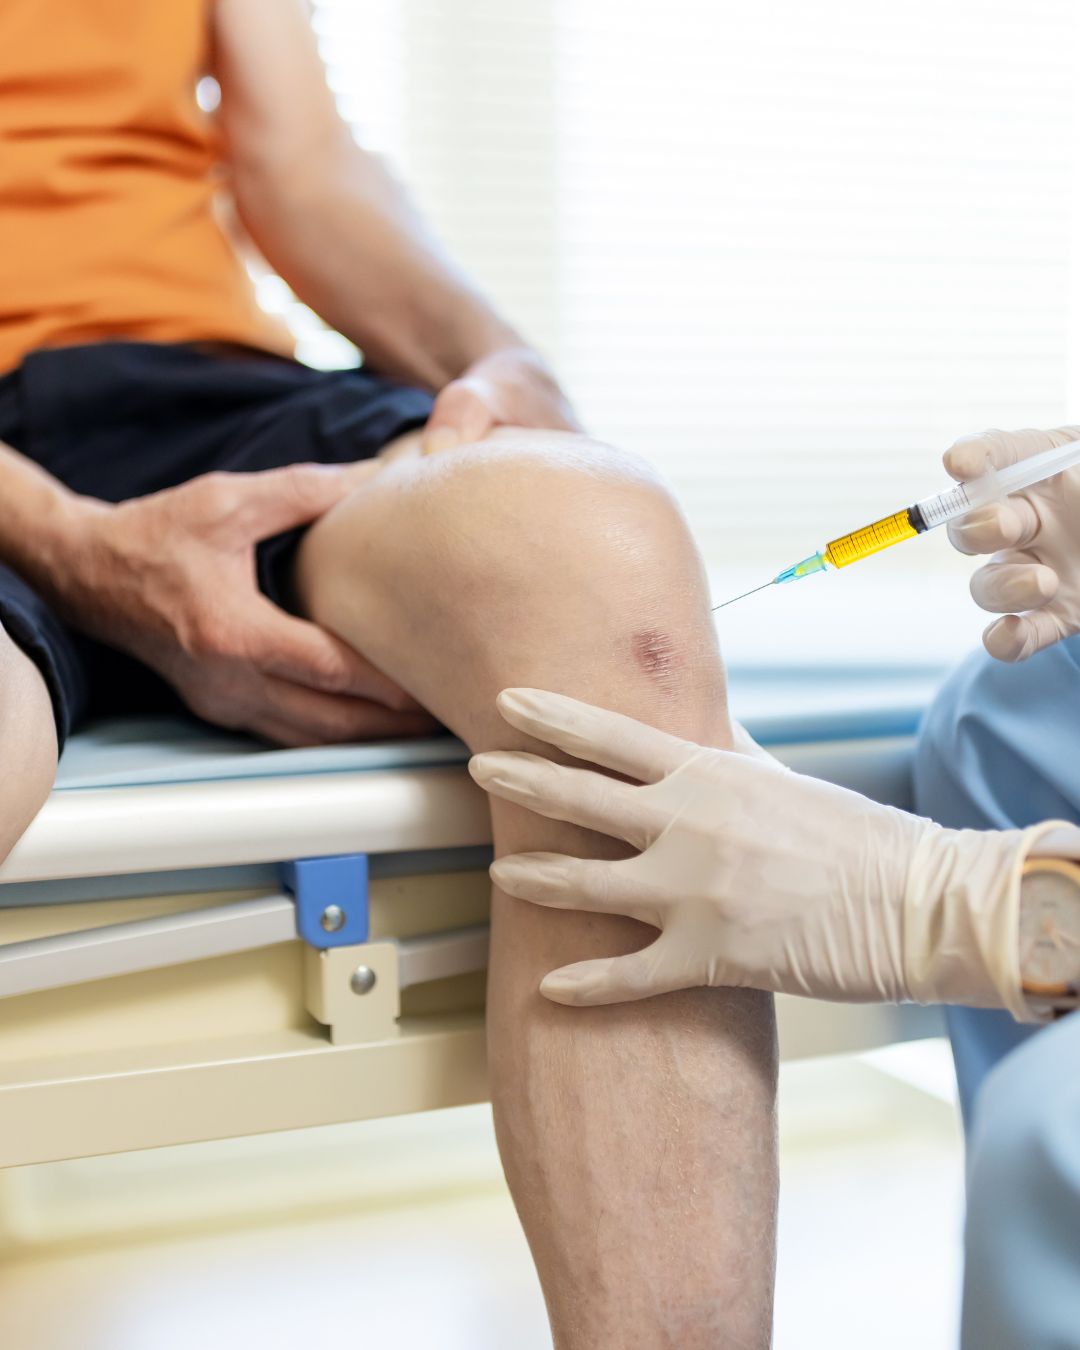 Newly Discovered Dangers Associated With Cortisone Injections